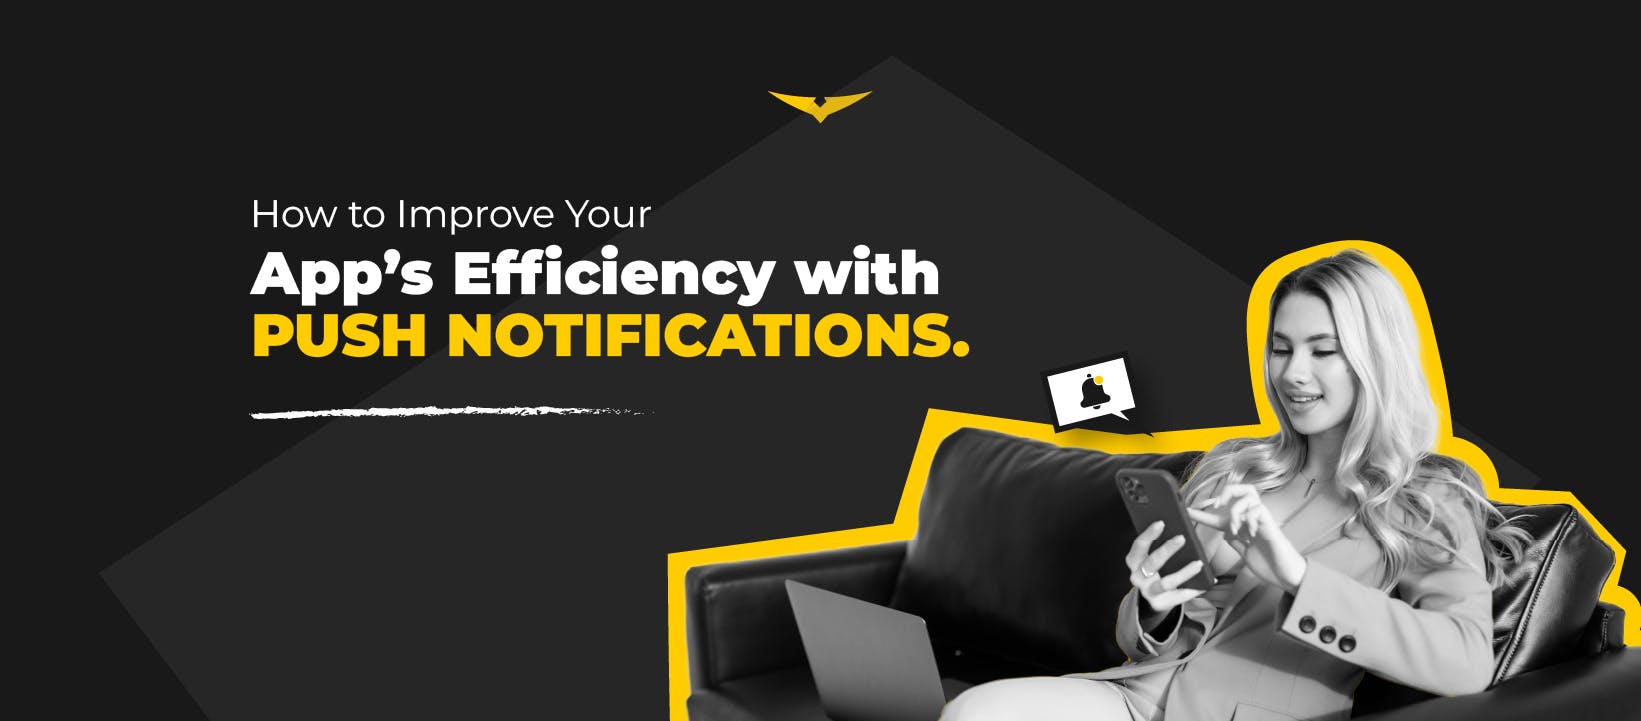 How to Improve Your App's Efficiency with Push Notifications?